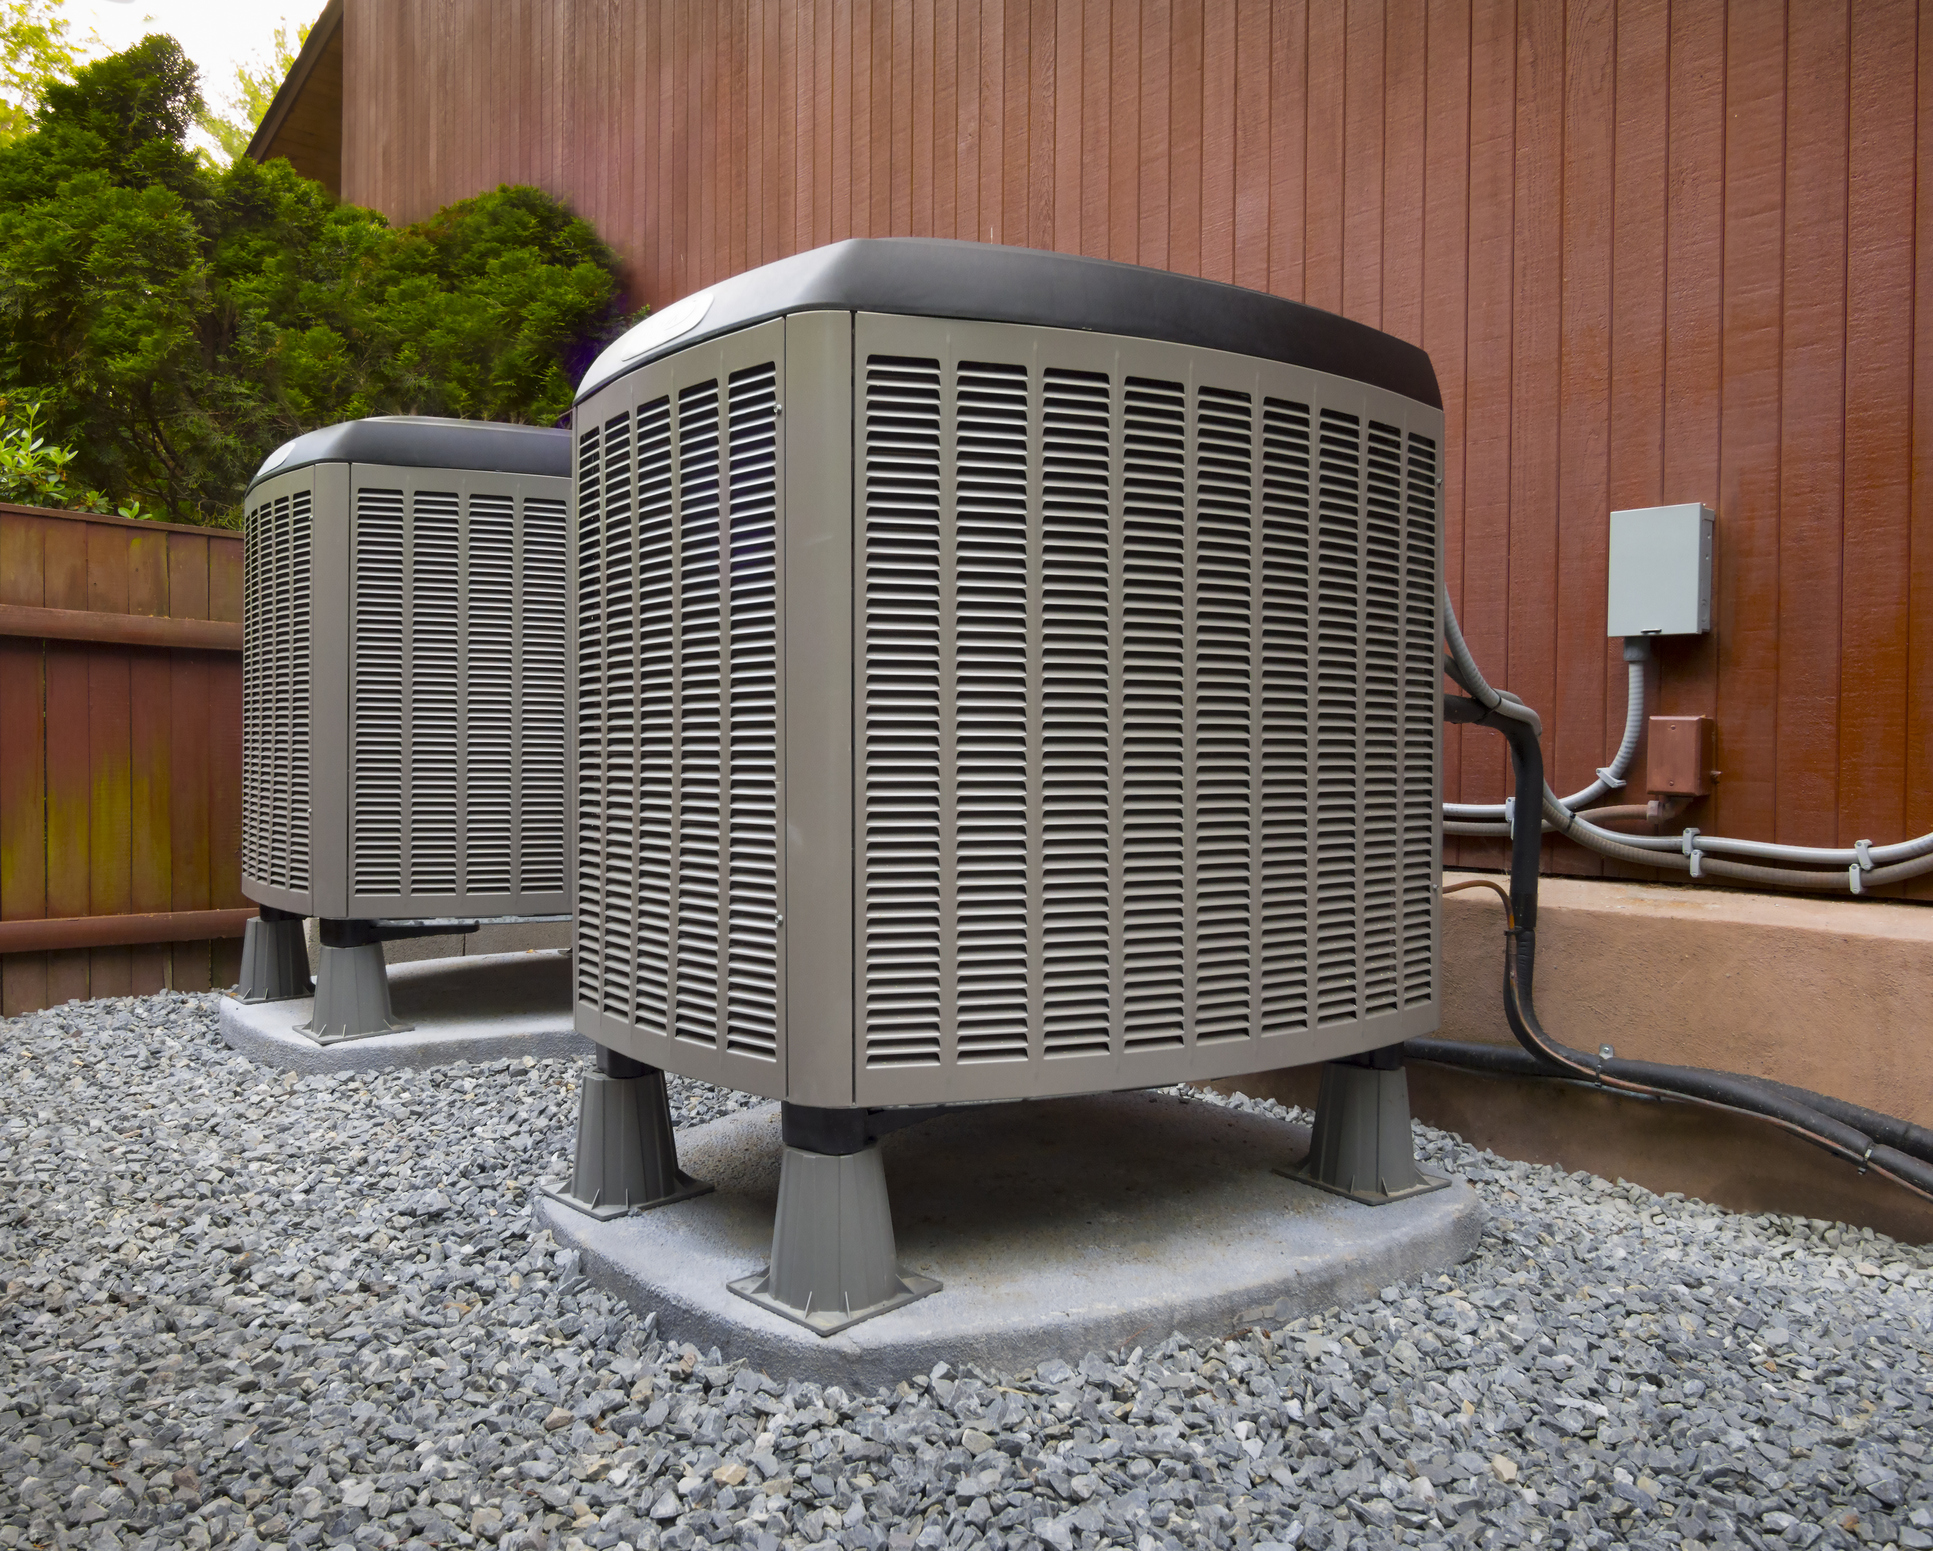 Is It Better To Have An Over-Sized or Undersized HVAC Unit?